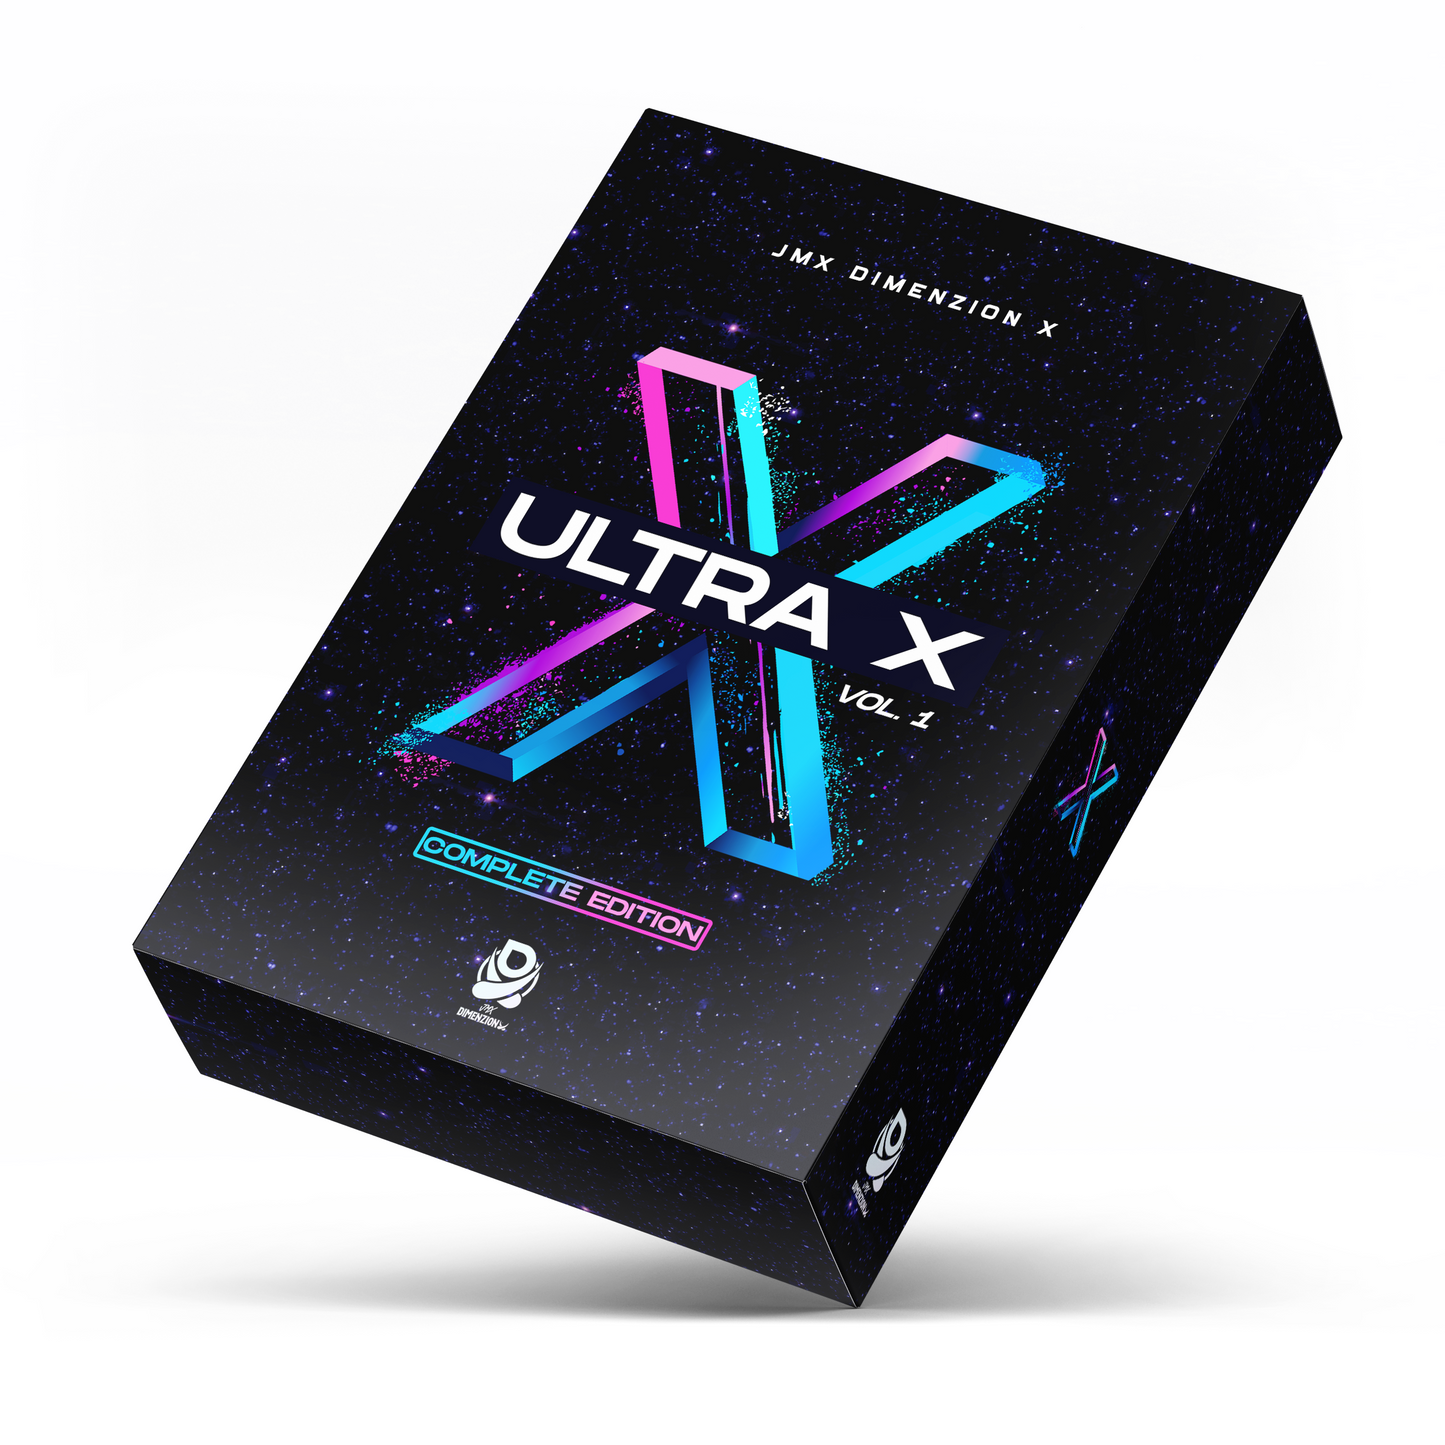 Ultra X Vol. 1 Complete Edition Sample Pack